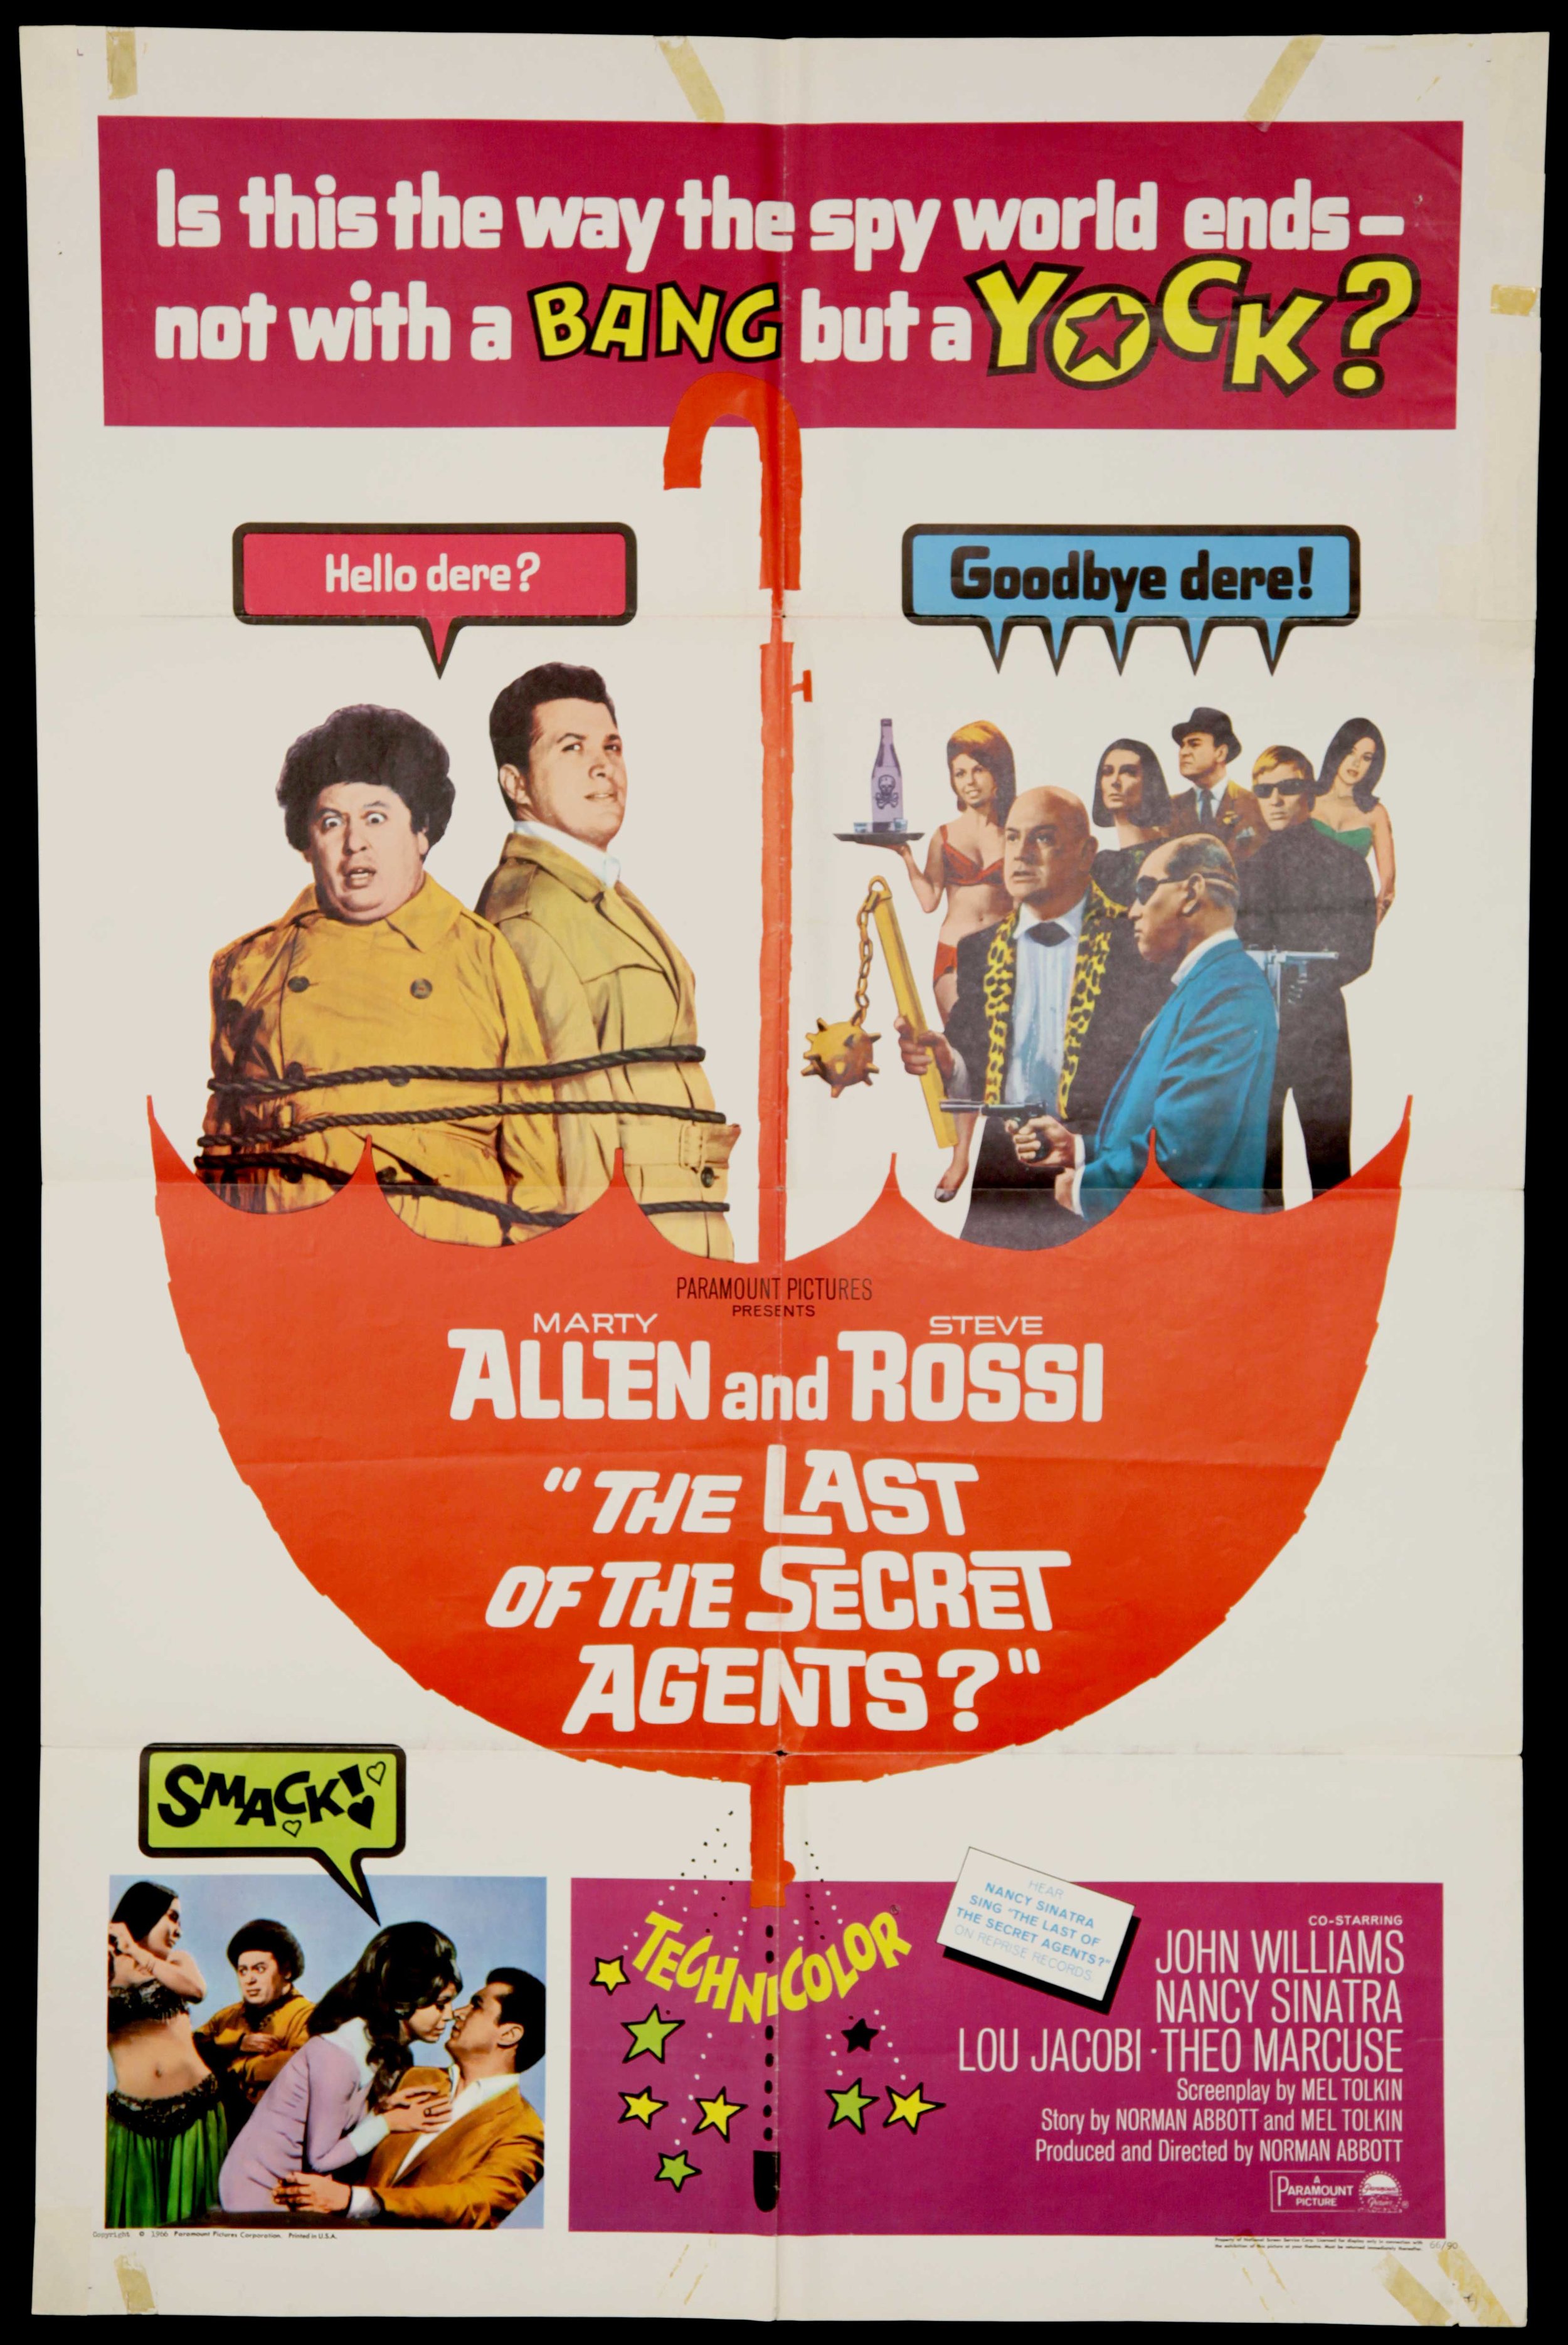  The Last of the Secret Agents? (1966)